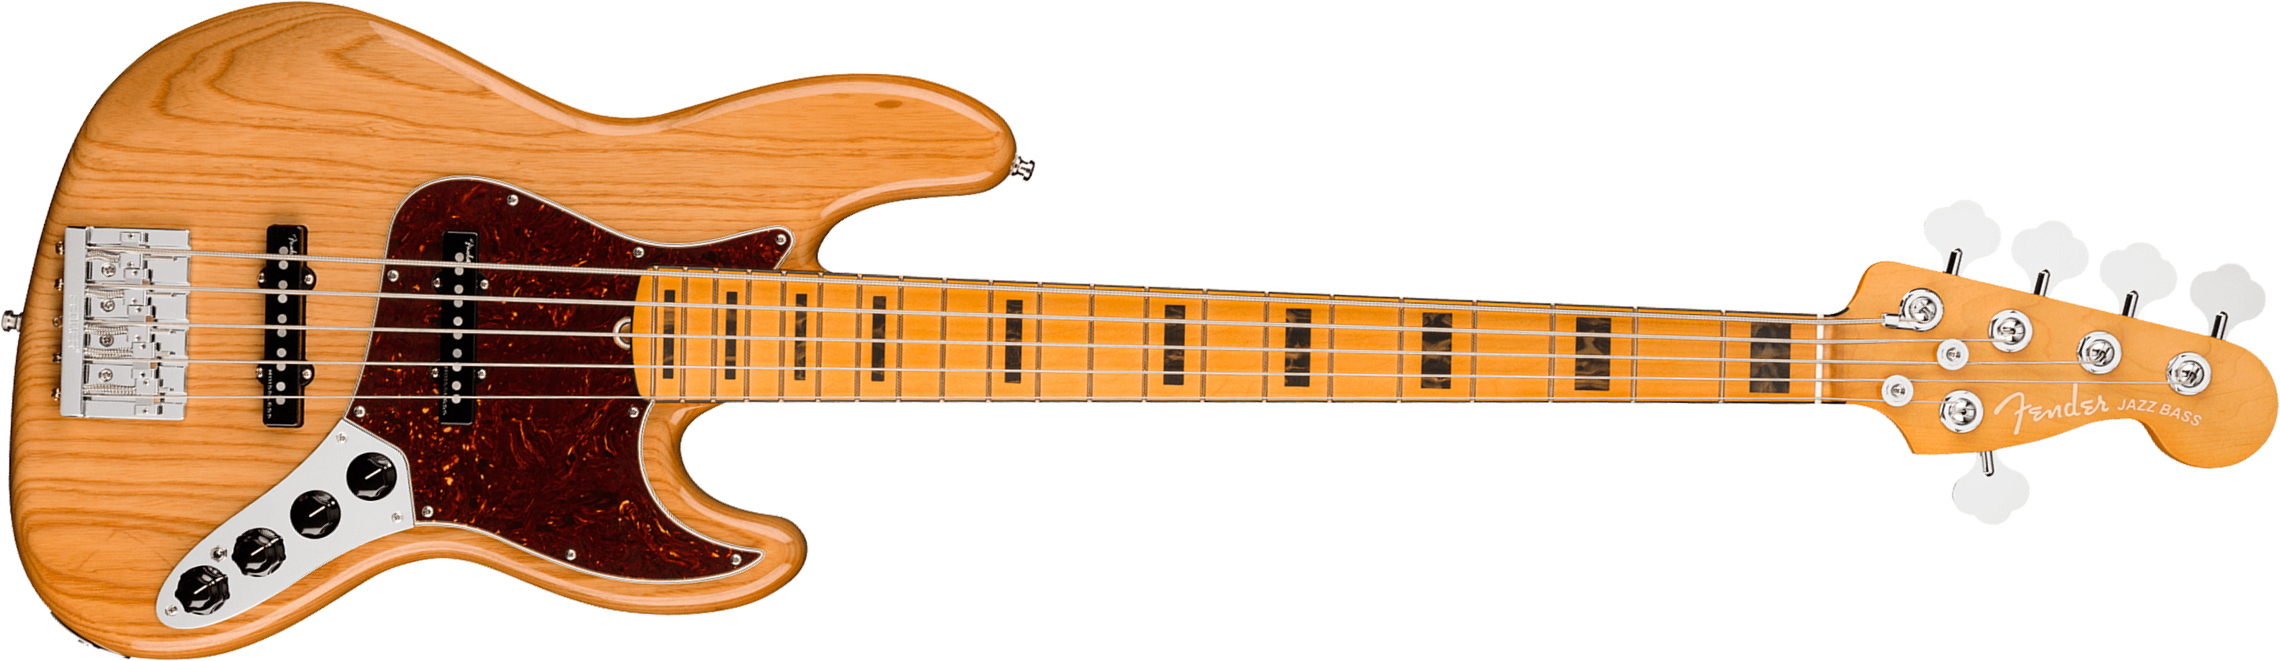 Fender Jazz Bass V American Ultra 2019 Usa 5-cordes Mn - Aged Natural - Solid body elektrische bas - Main picture